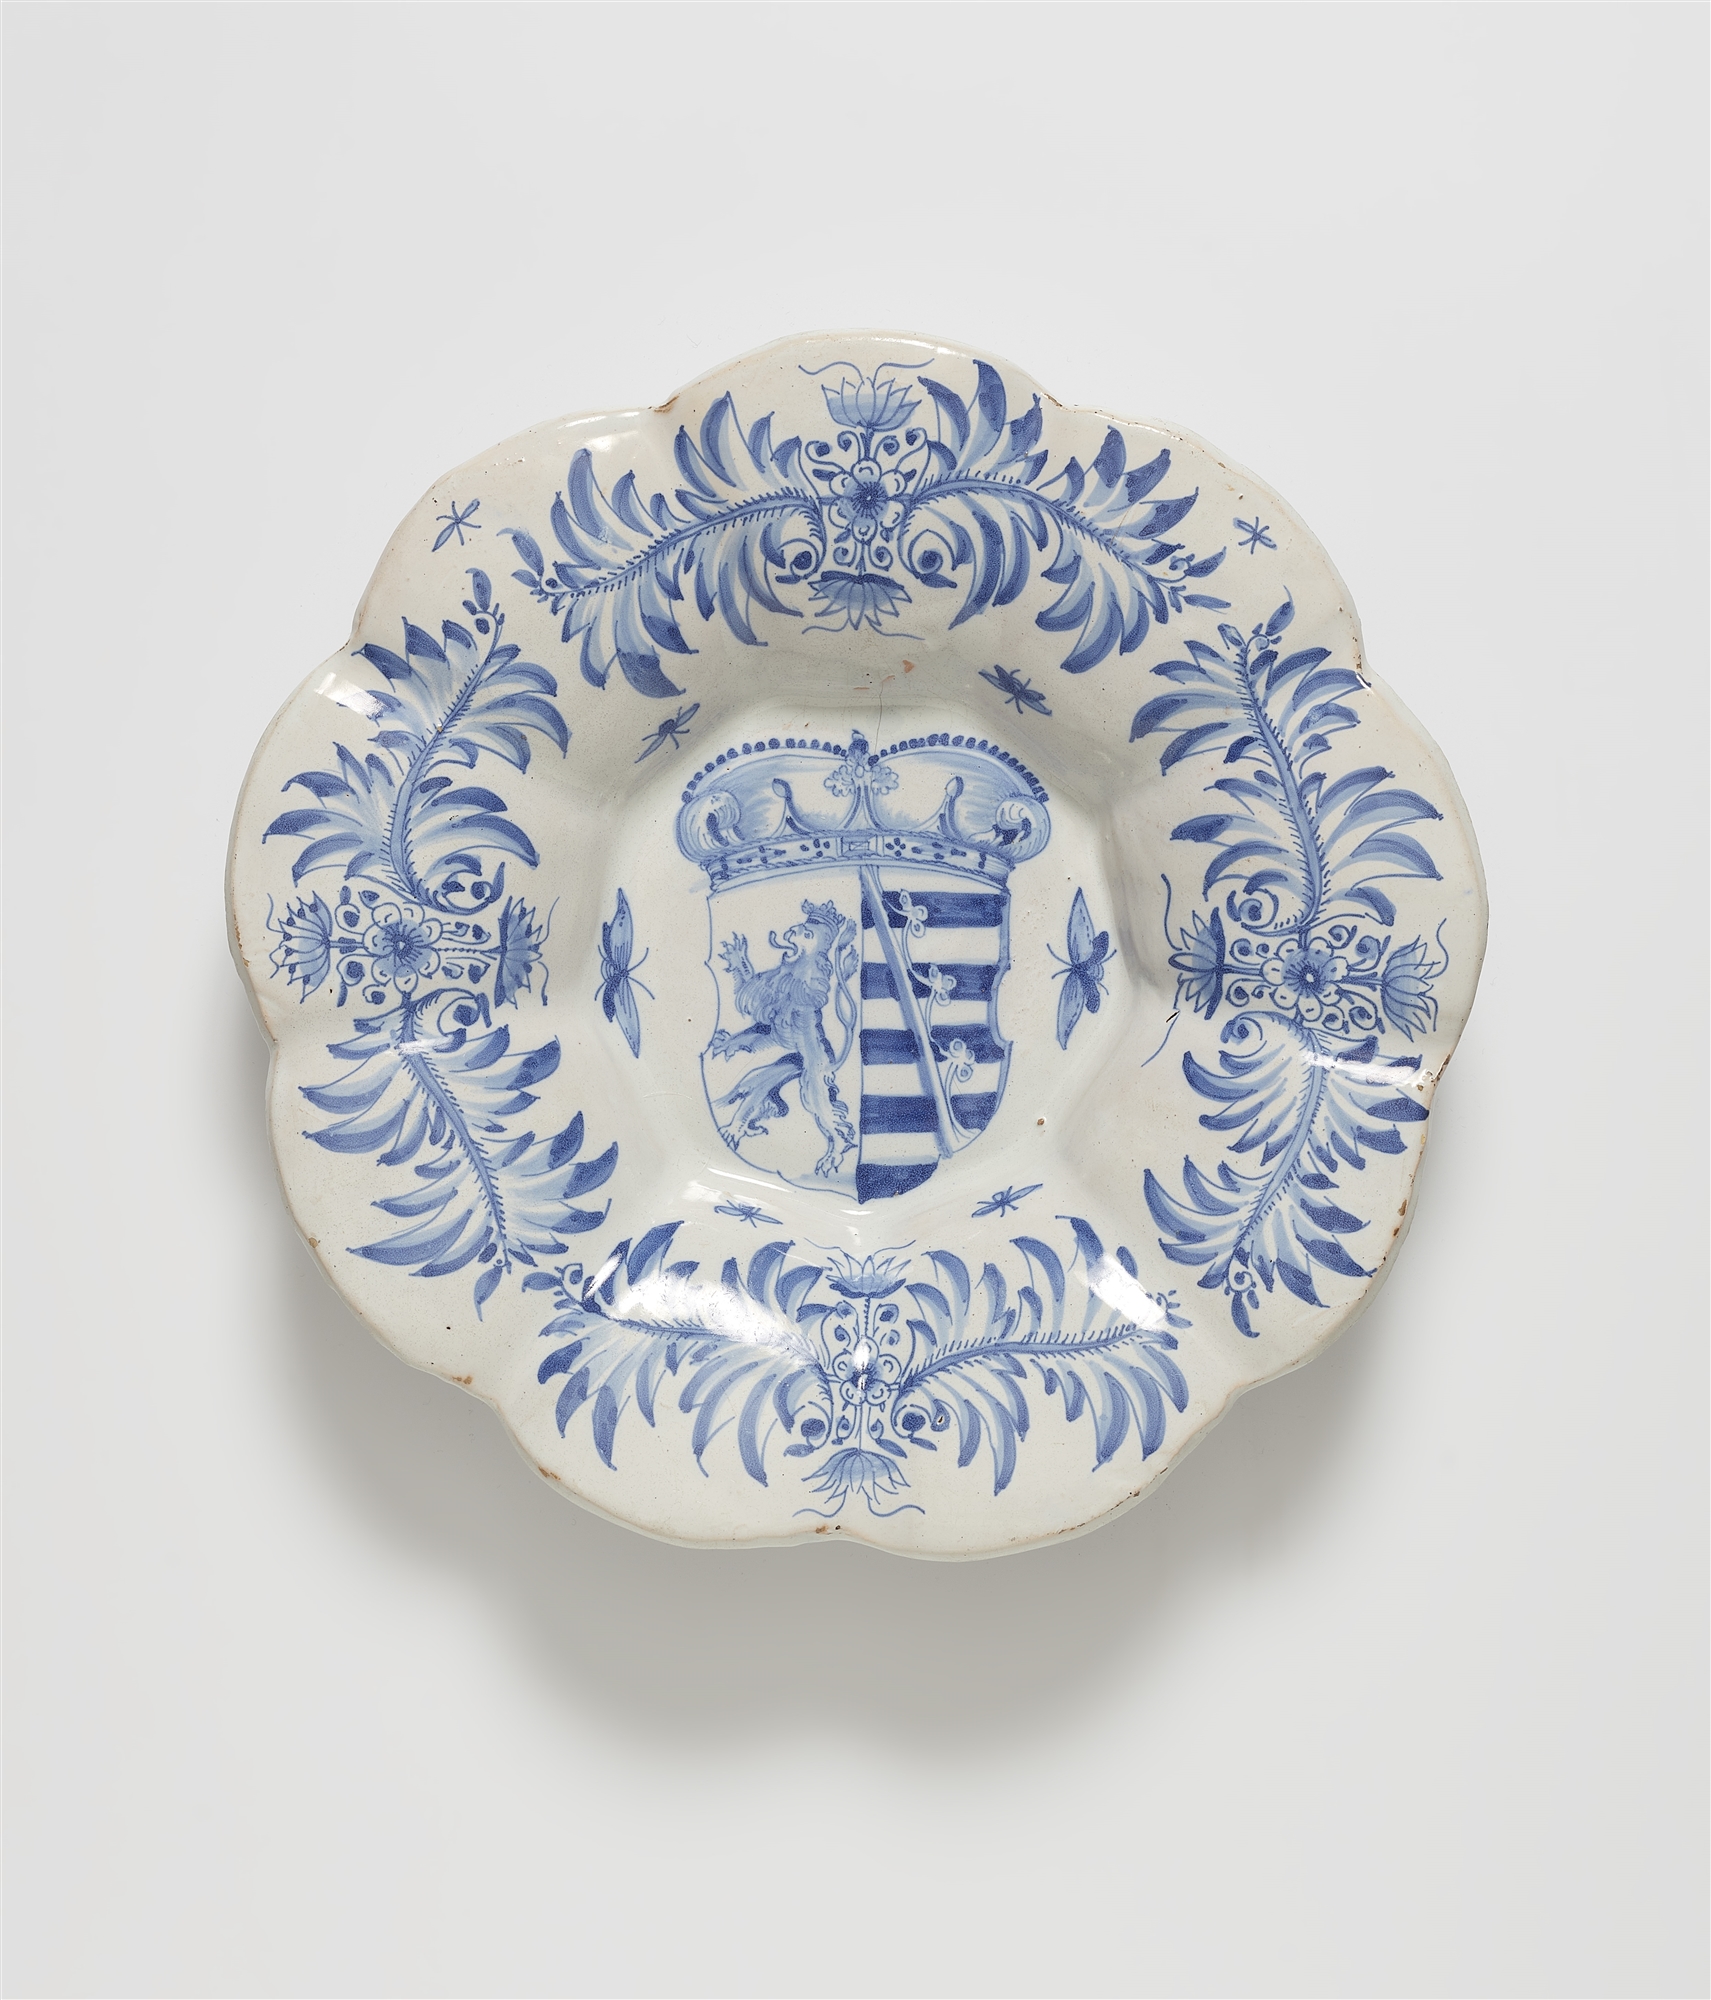 An important Frankfurt faience dish with the royal Saxon coat of arms